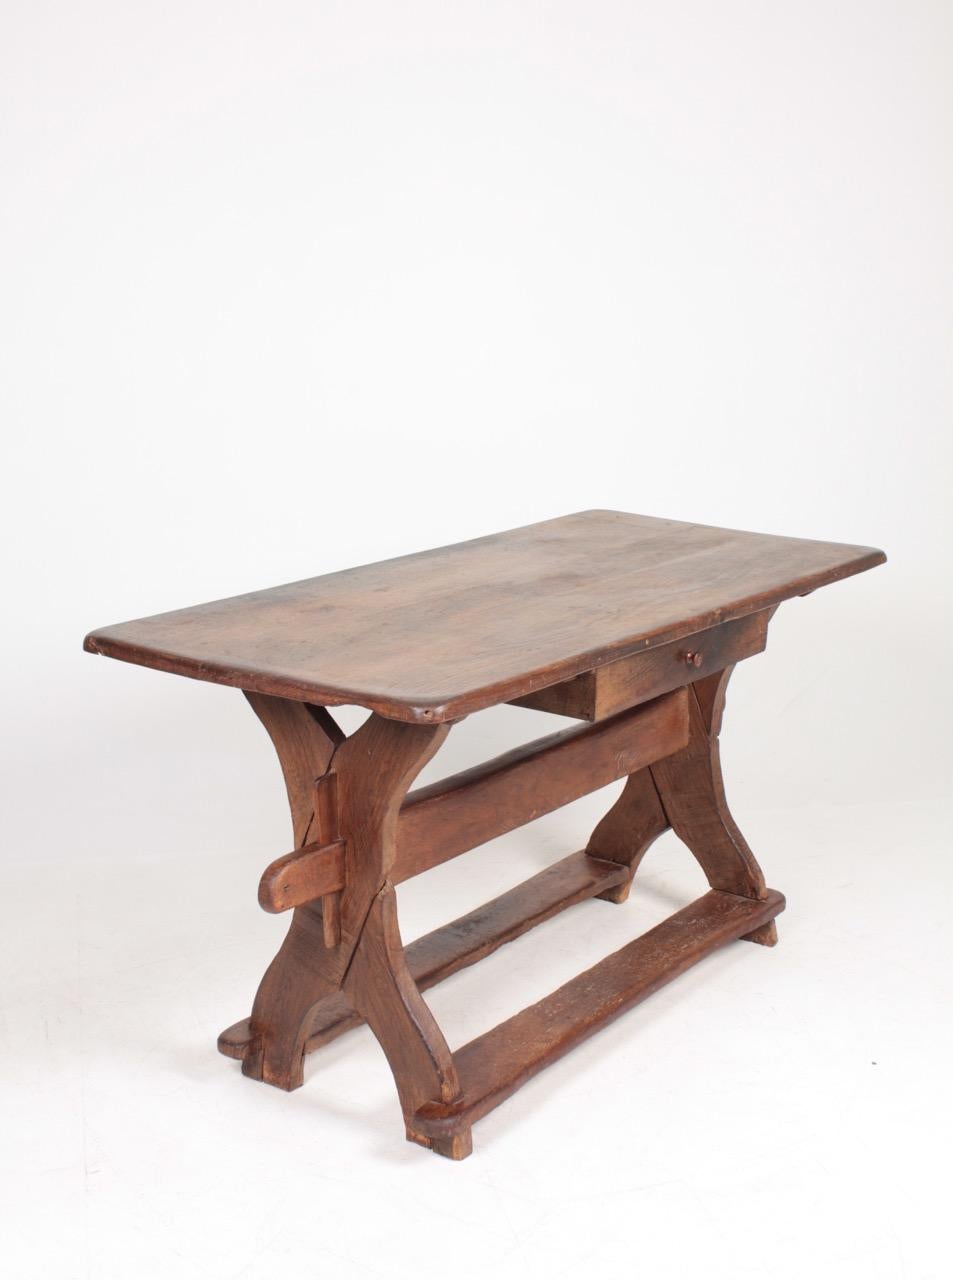 Antique Scandinavian Baroque Table in Patinated Solid Oak, 18th Century 4